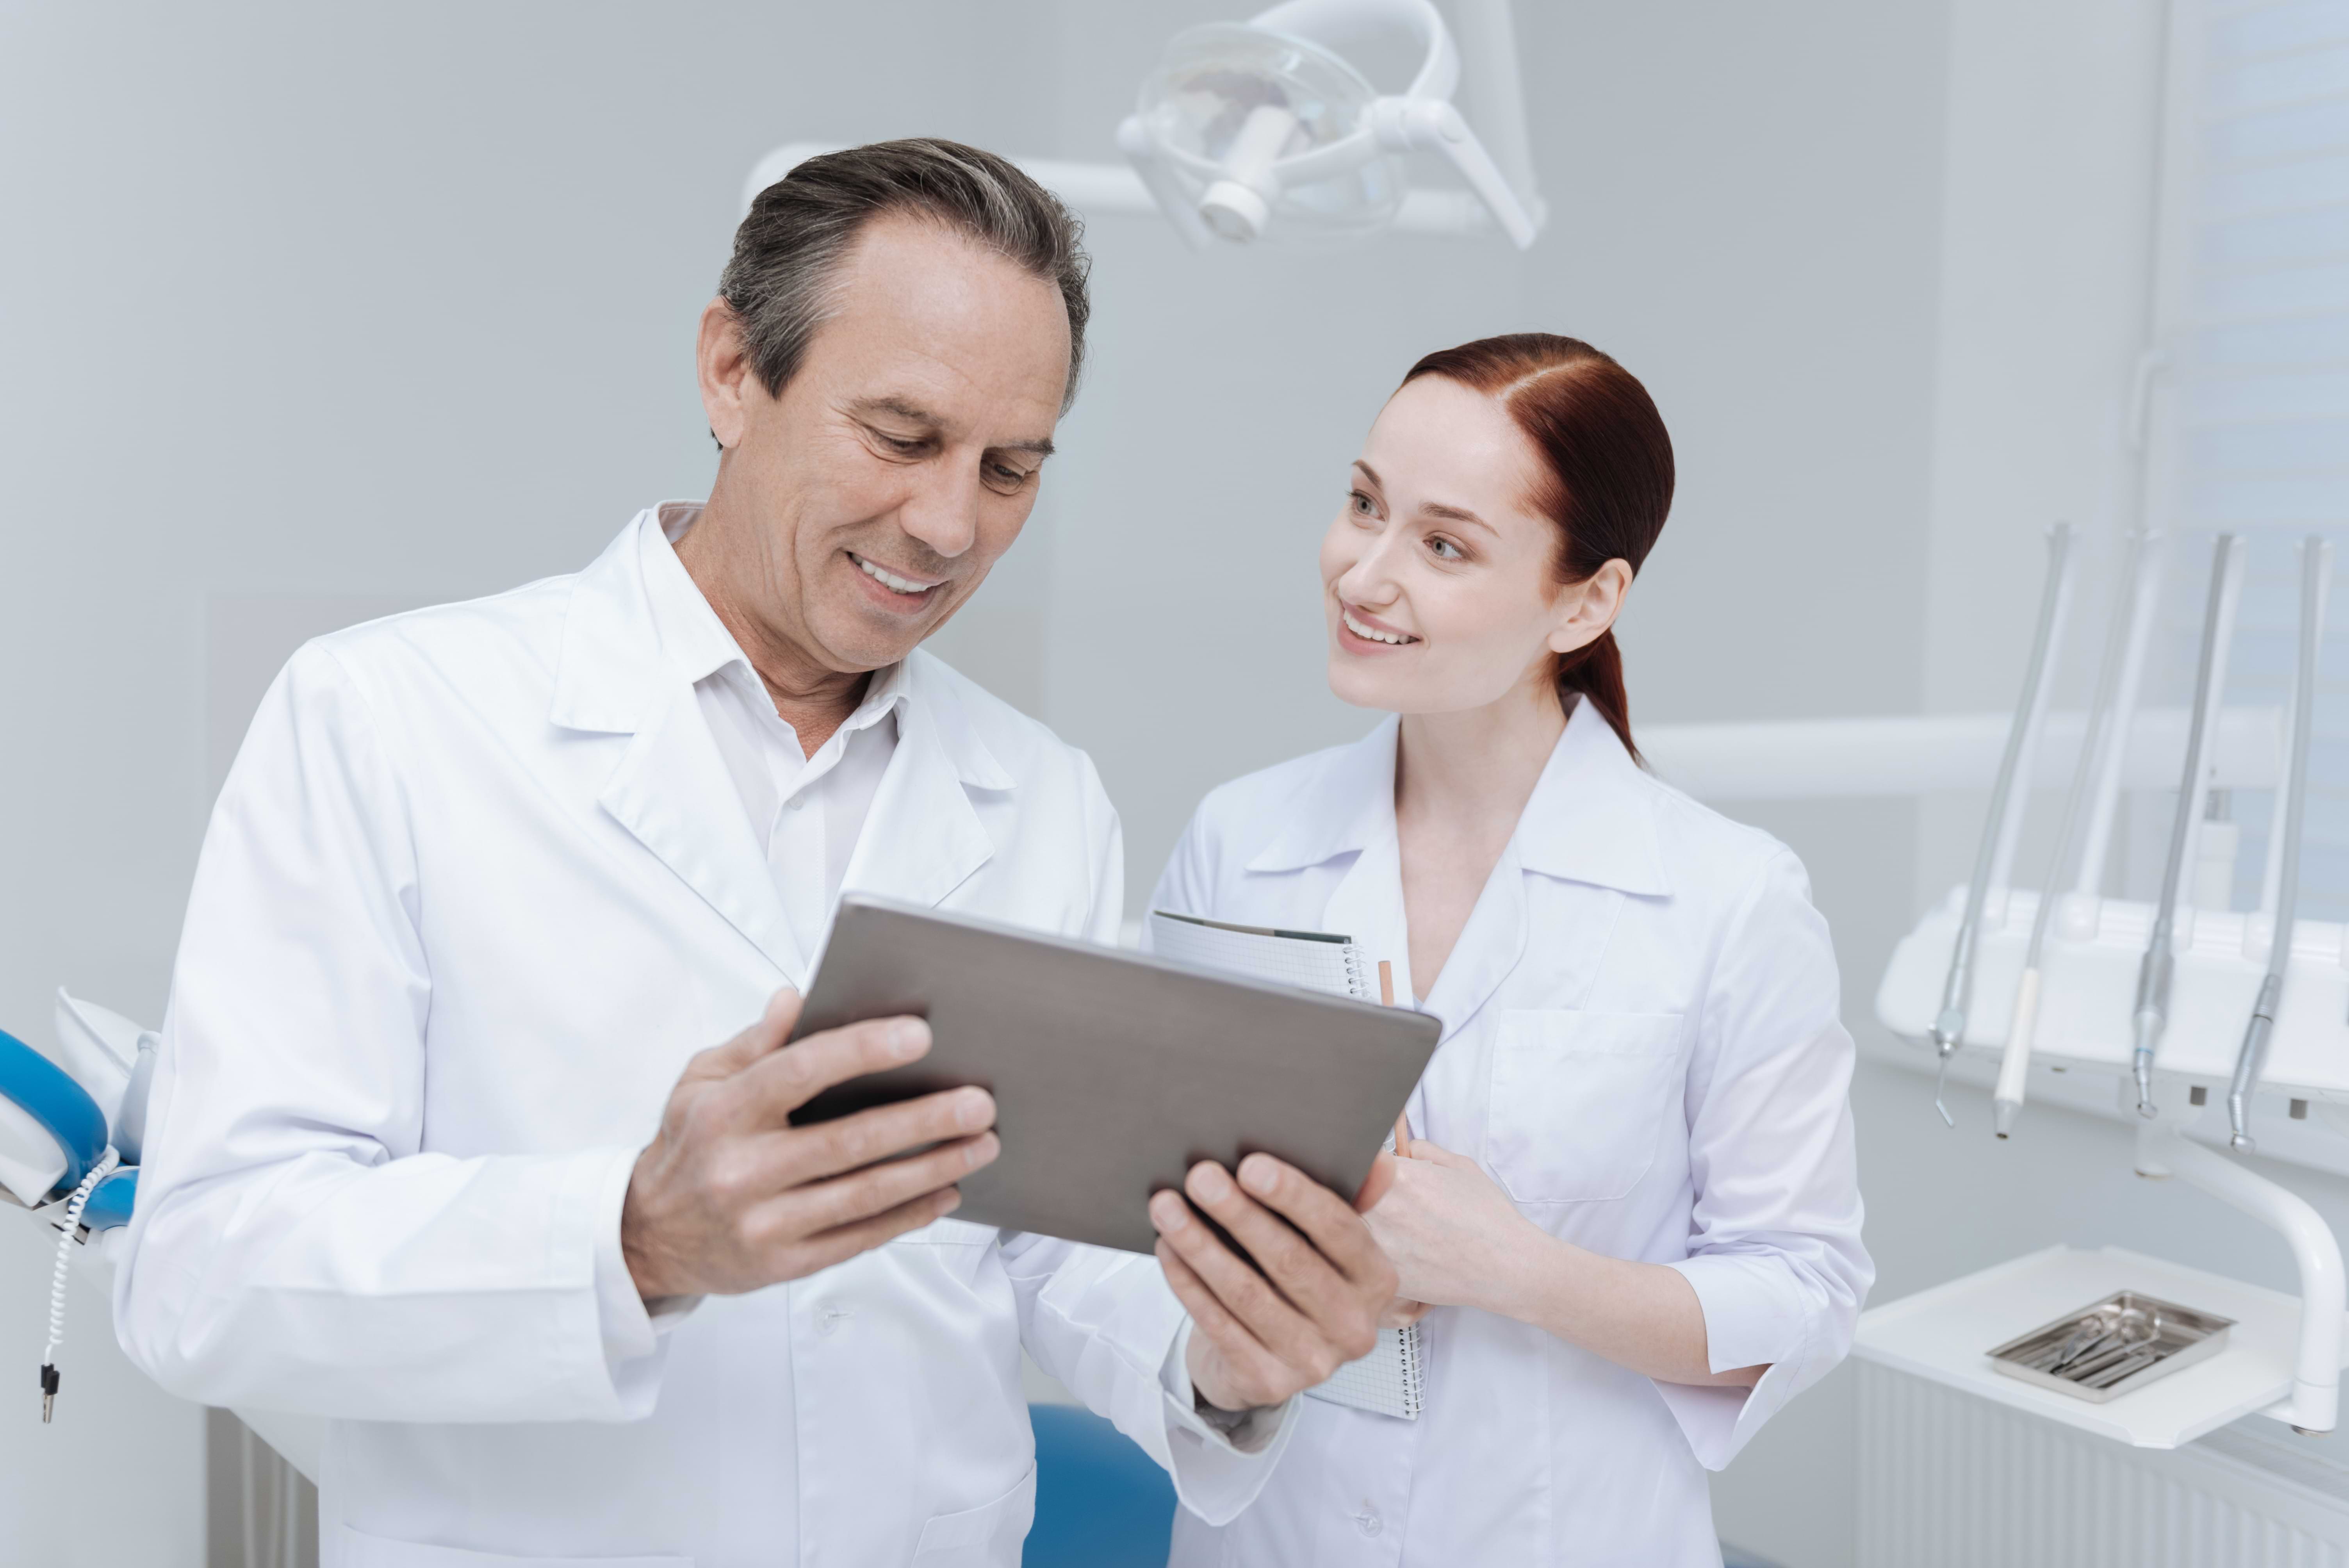 7 Reasons To Complete Your Physician Assistant Internship